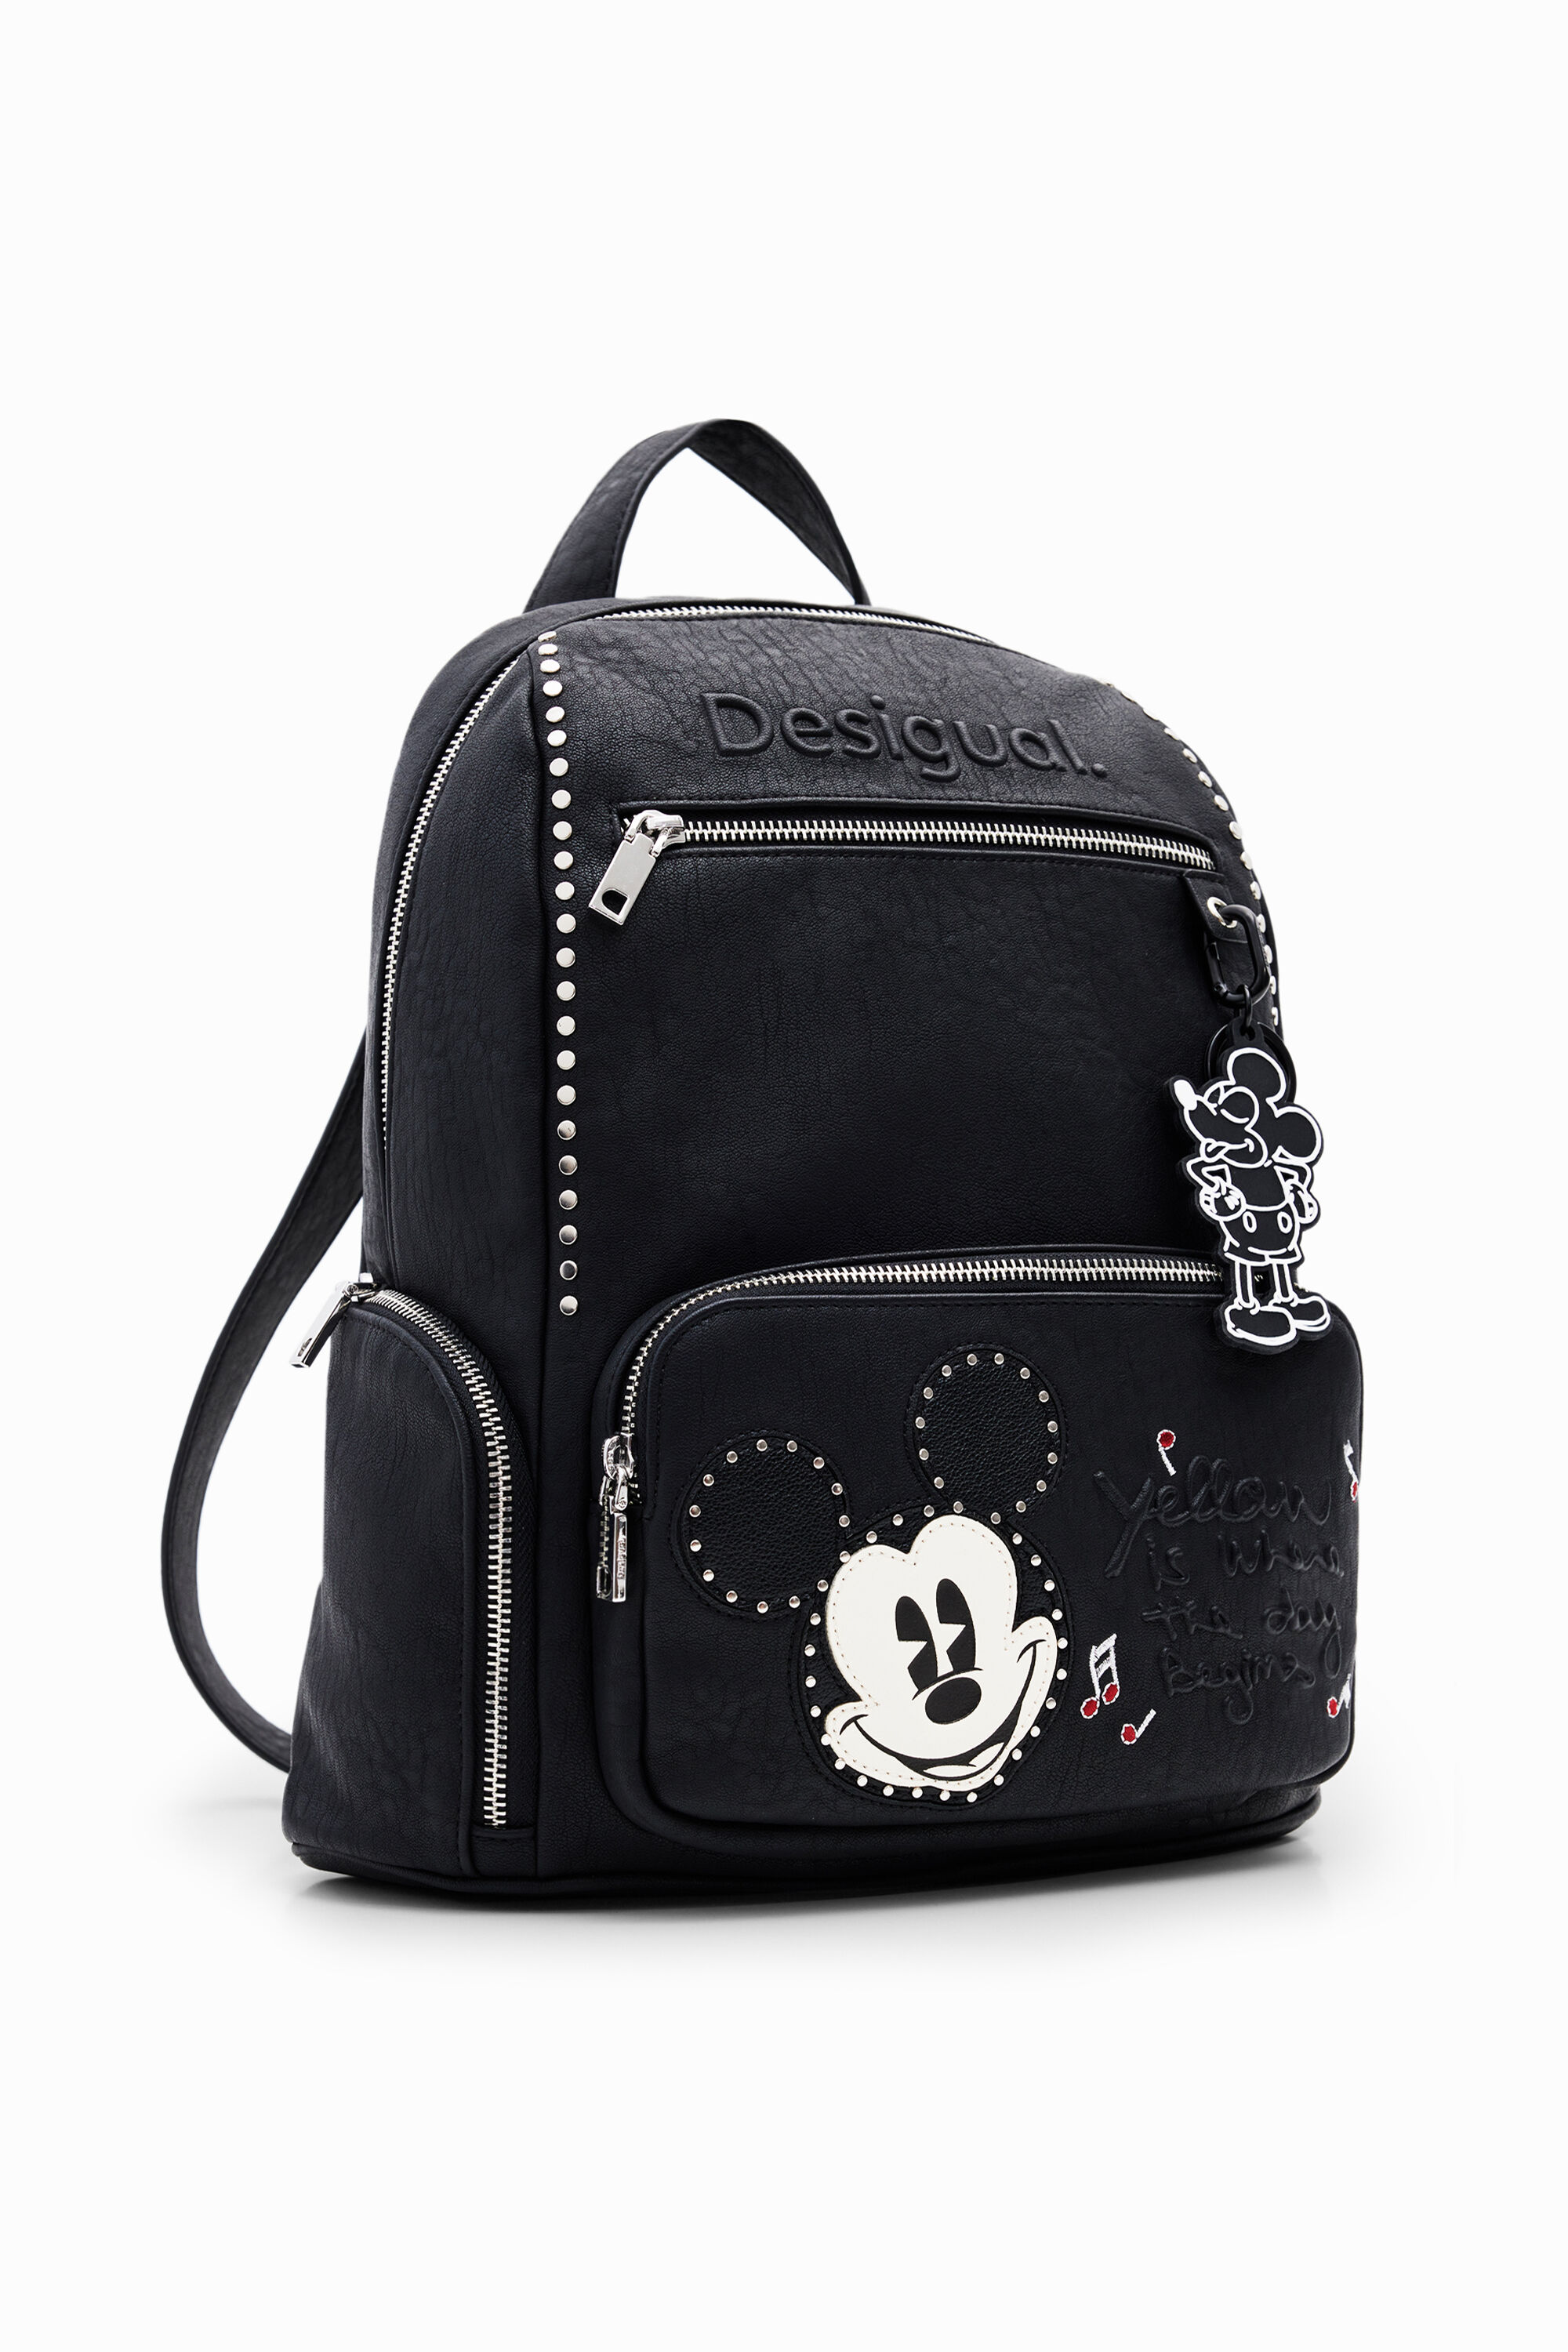 Desigual M Mickey Mouse backpack